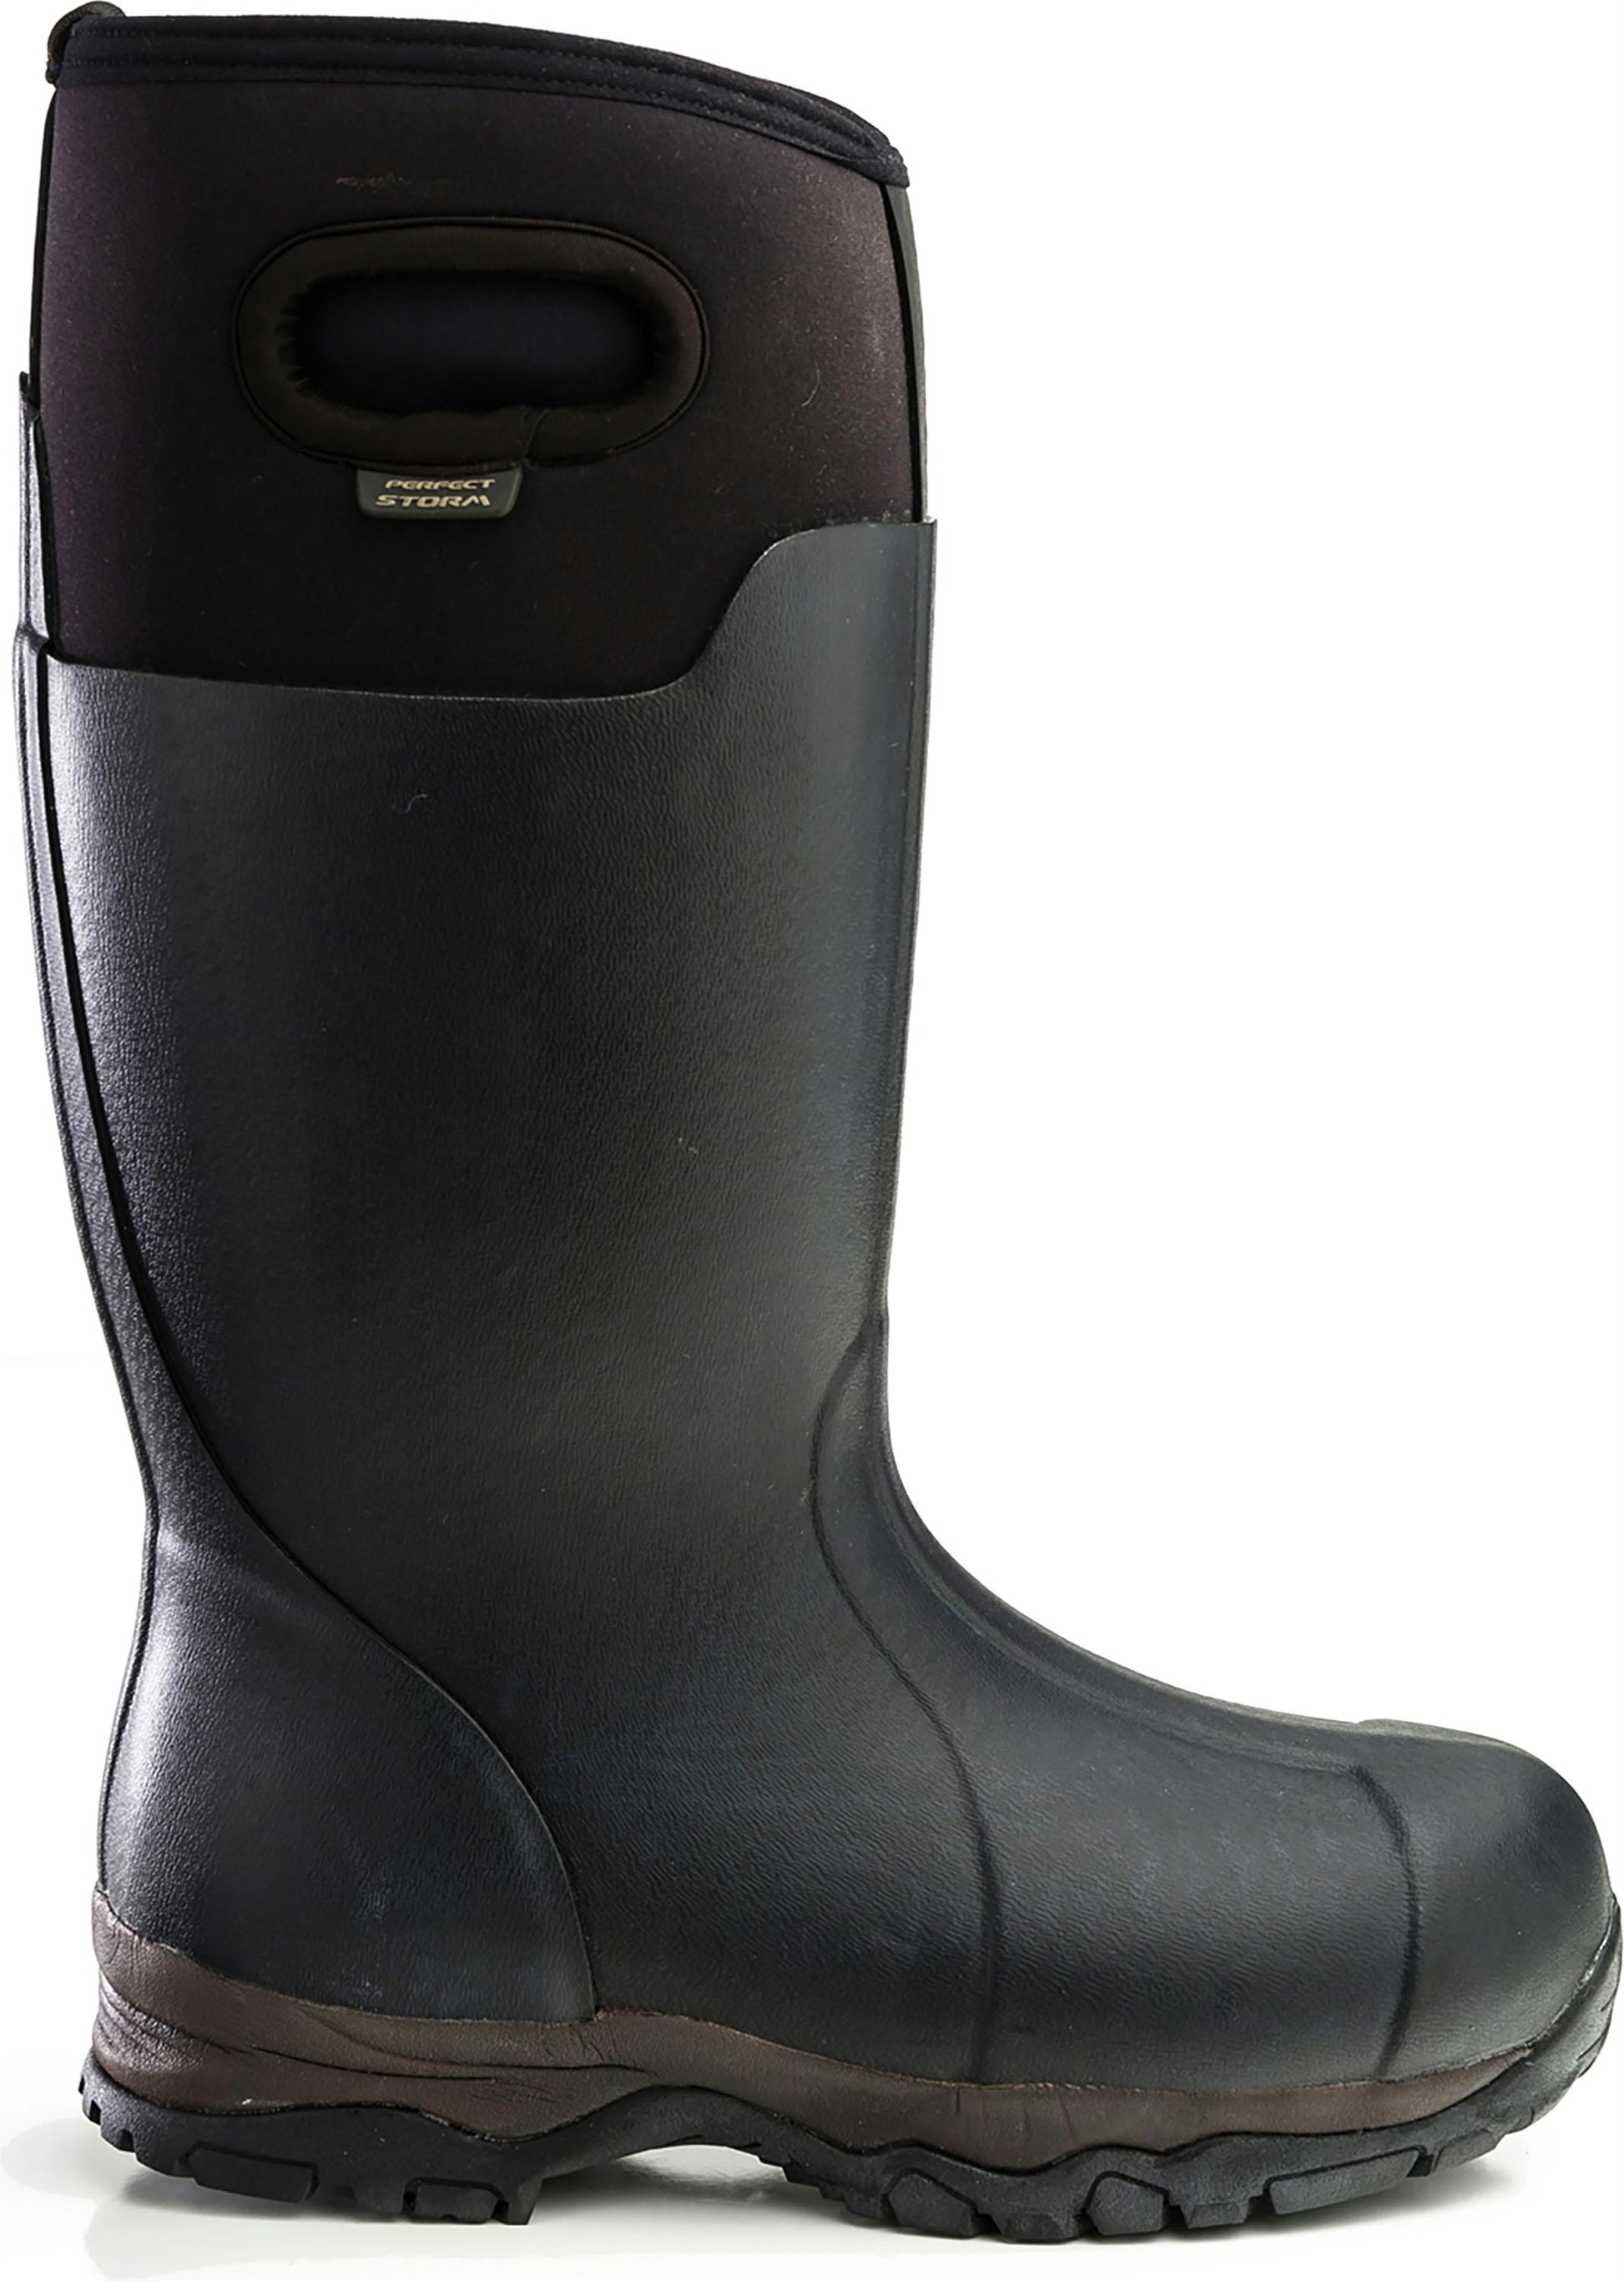 Mens Shelter High Boot - aomega-products